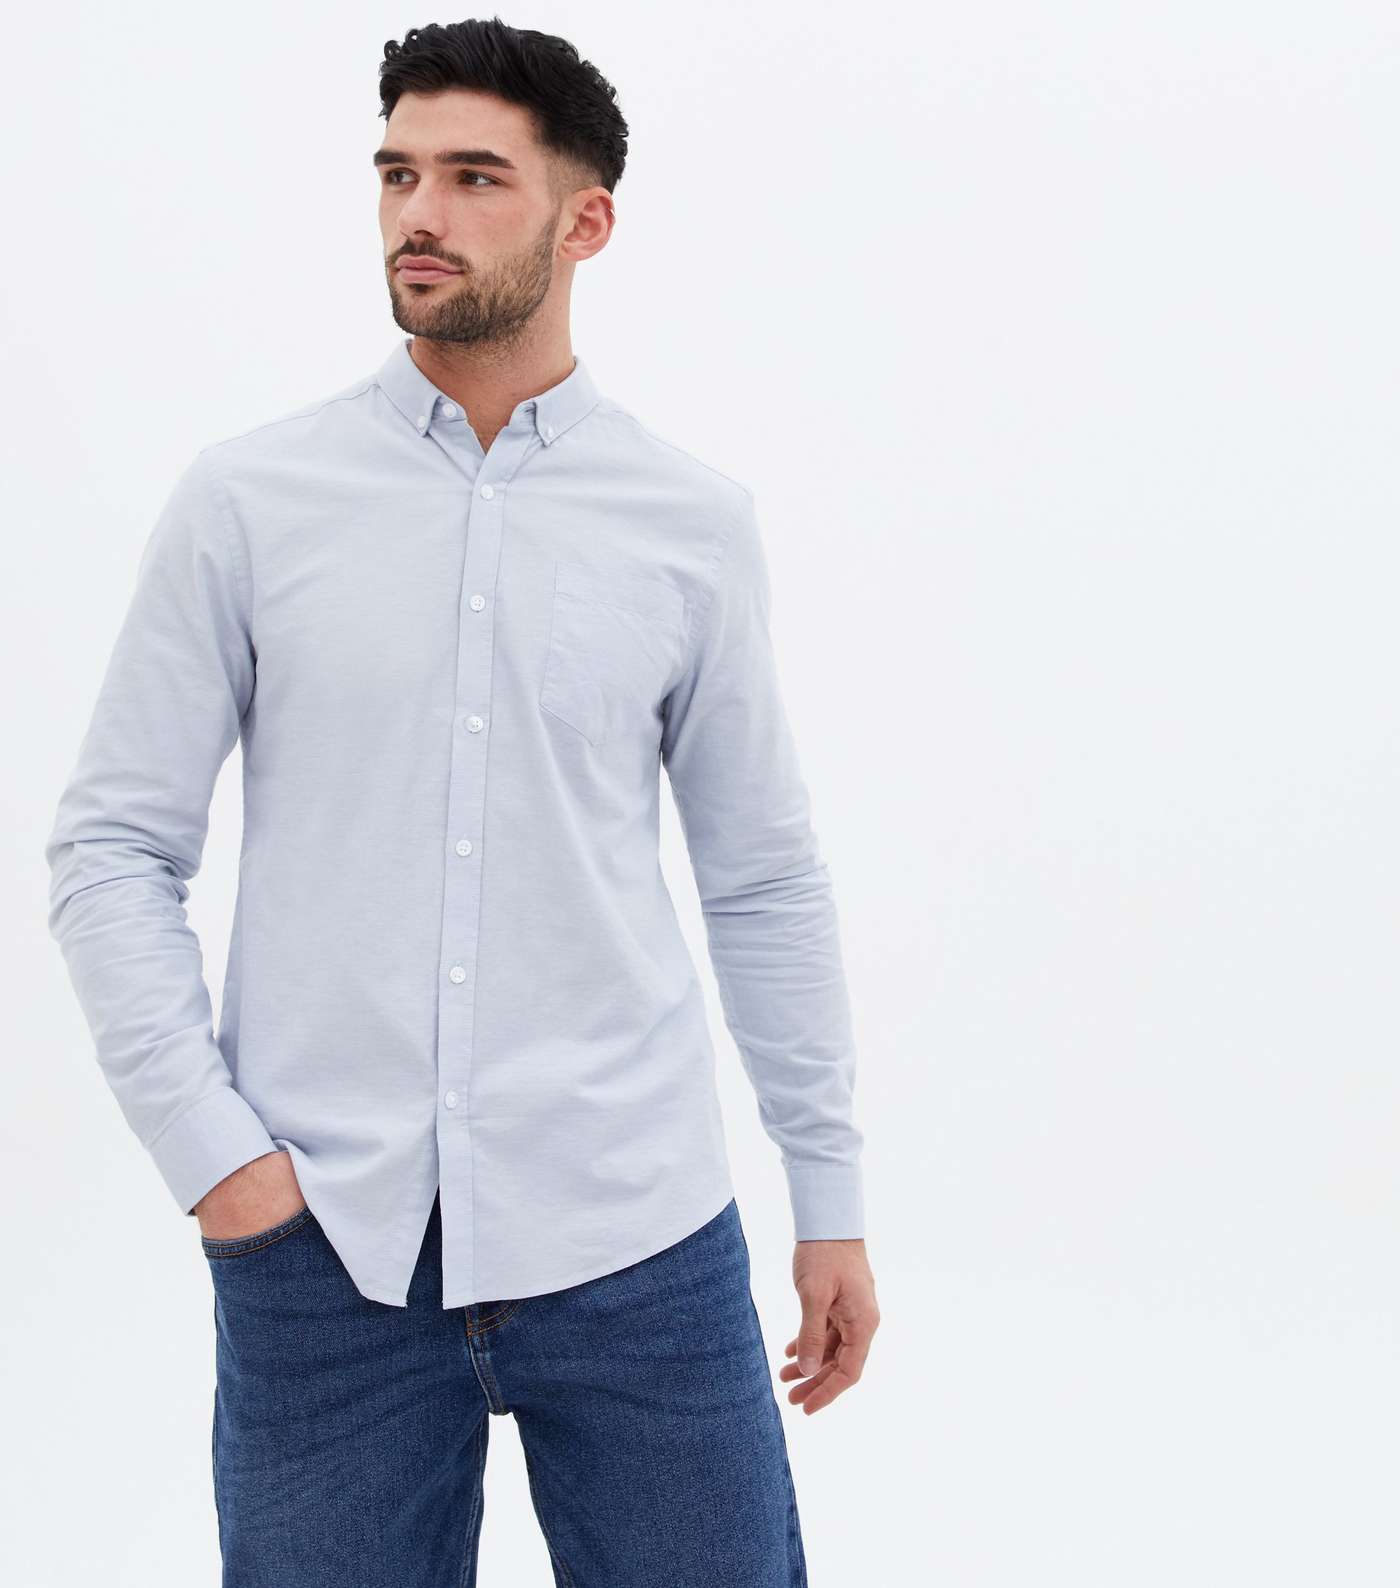 2 Pack Pale Blue and White Long Sleeve Oxford Shirts Image 2